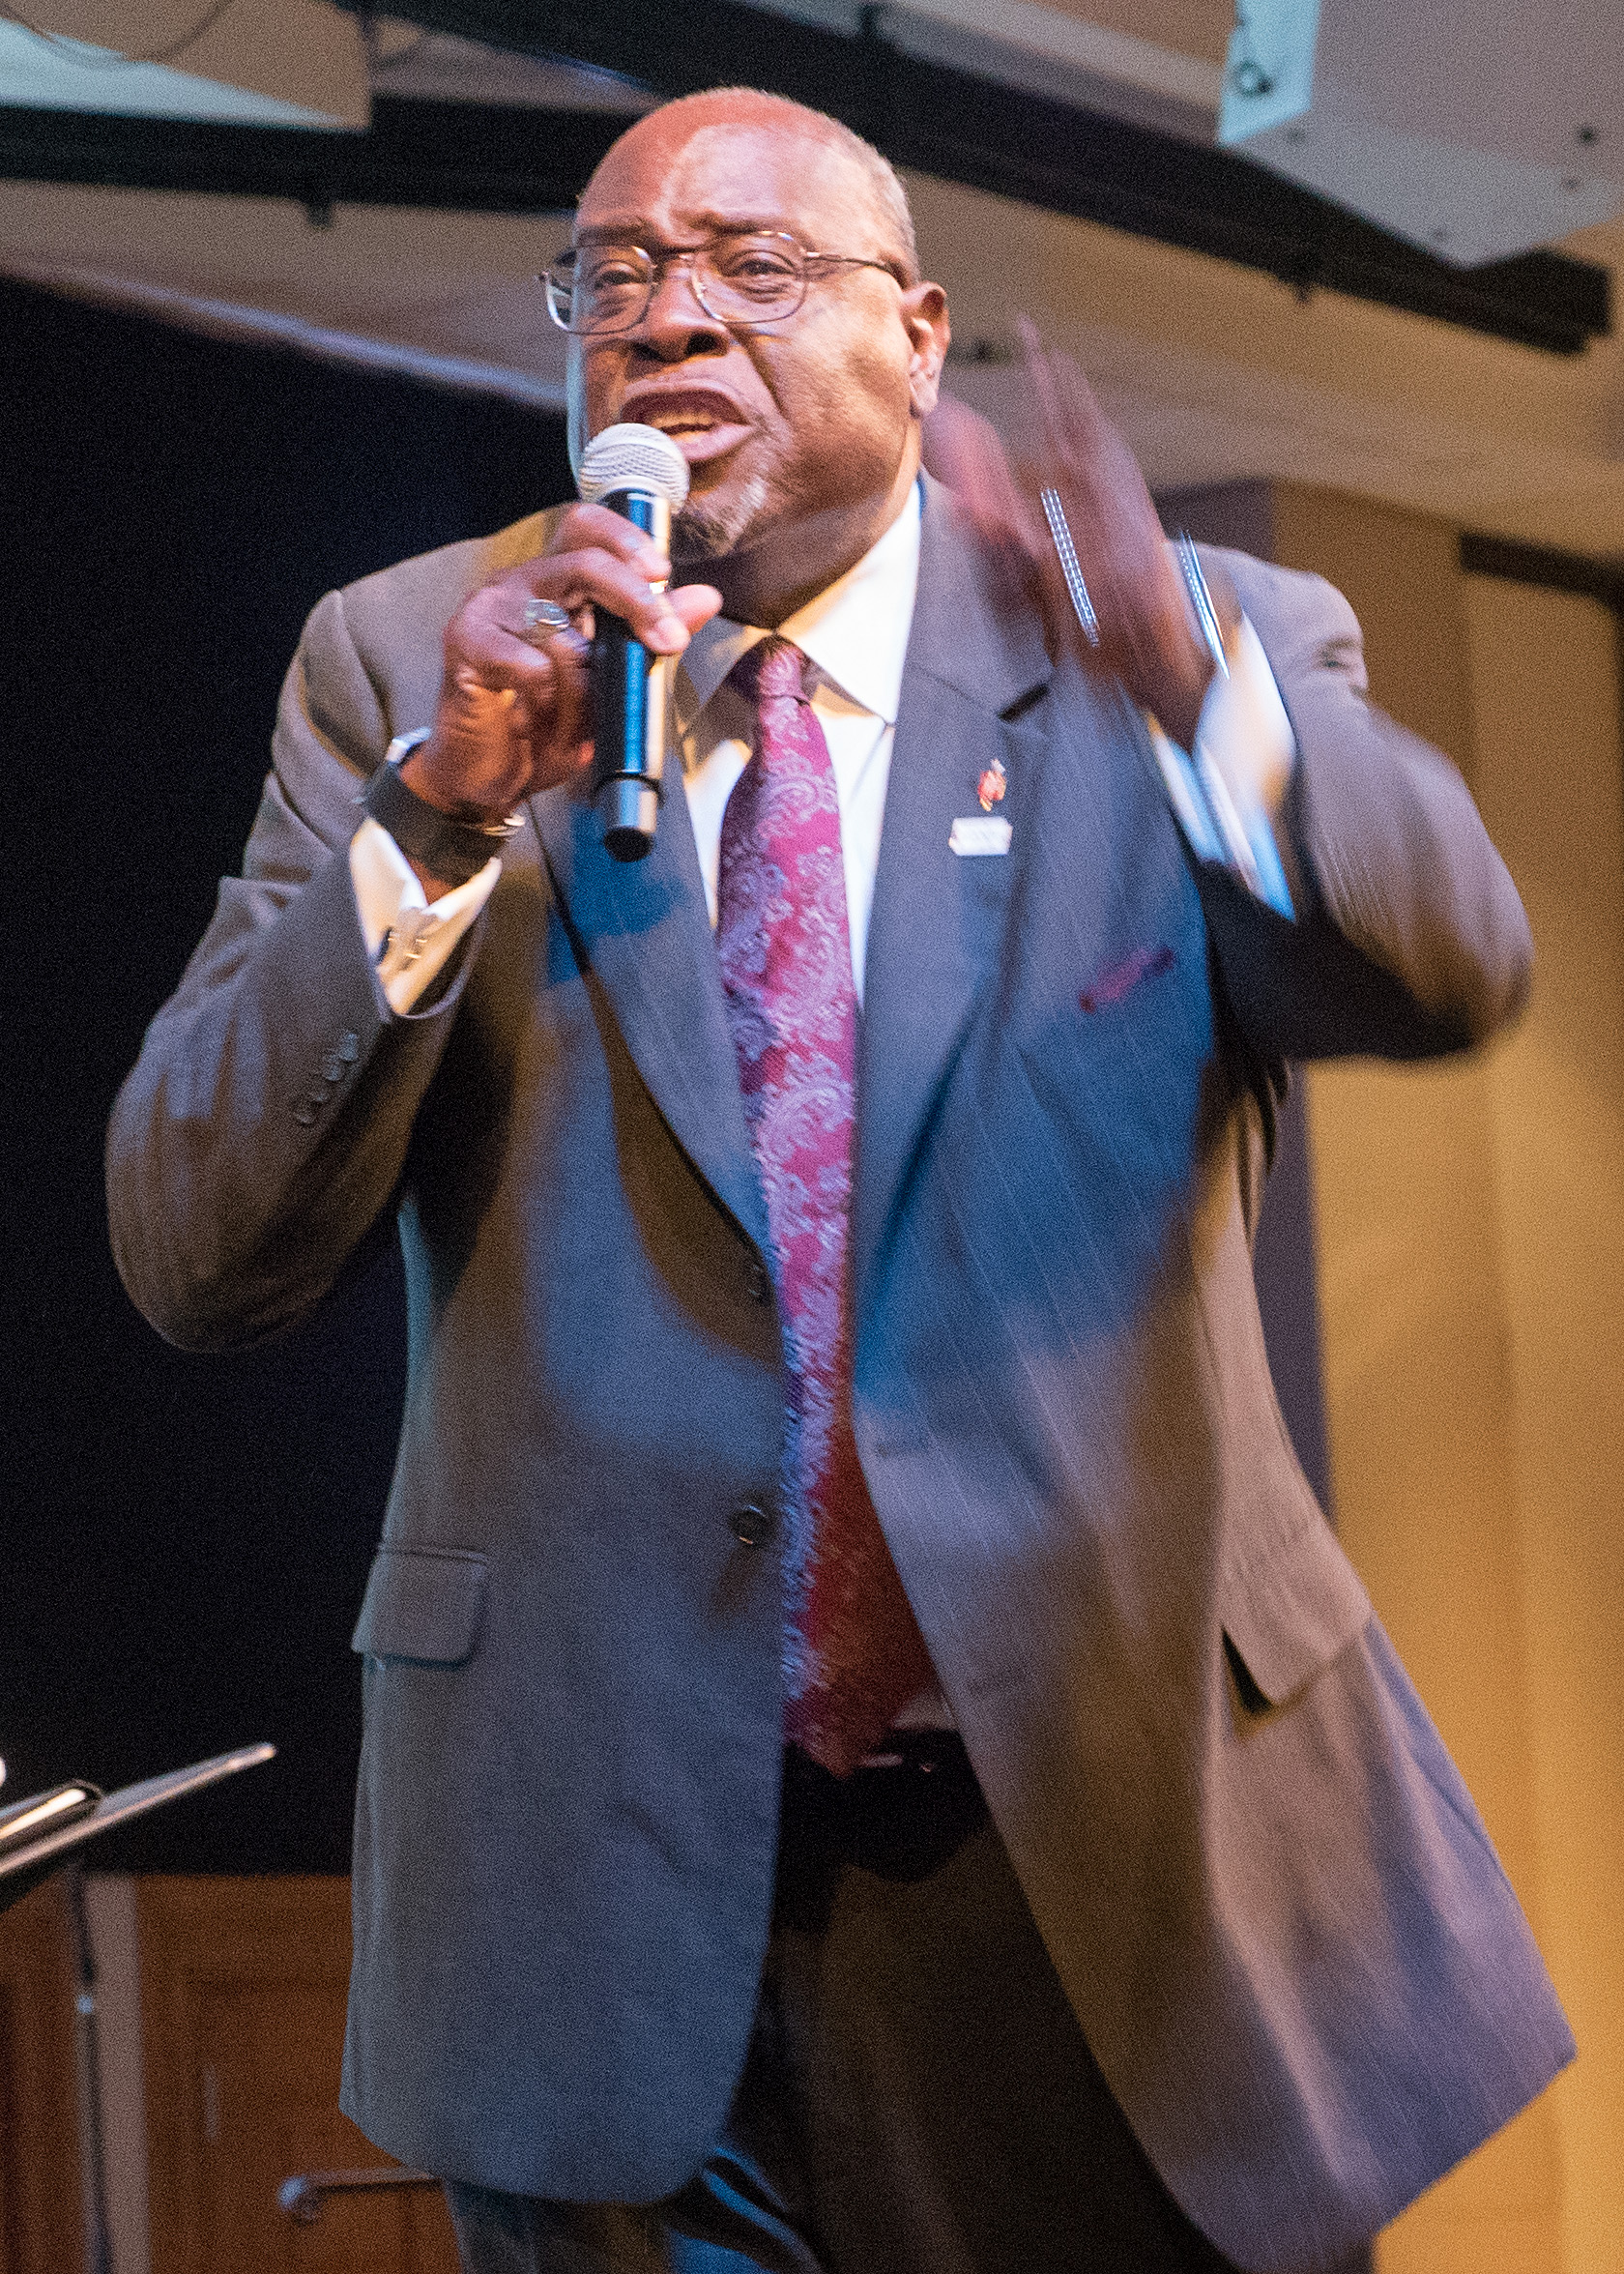 Mississippi Area Bishop James Swanson preaches during evening worship April 28 at a Wesleyan Covenant Association gathering. Photo by Tim Tanton, UMNS